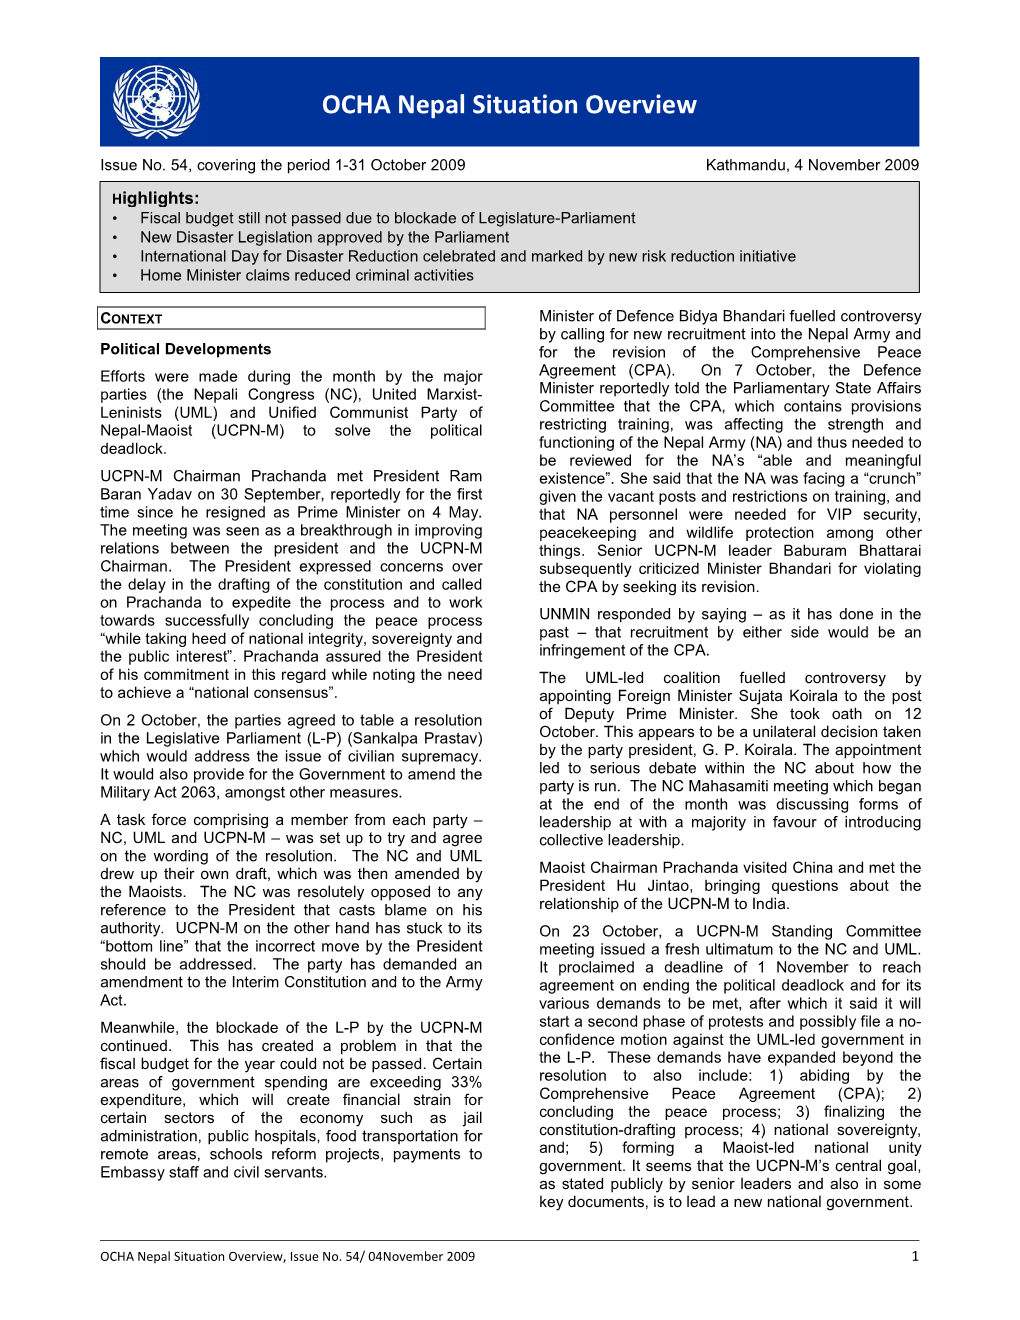 OCHA Nepal Situation Overview-October-2009